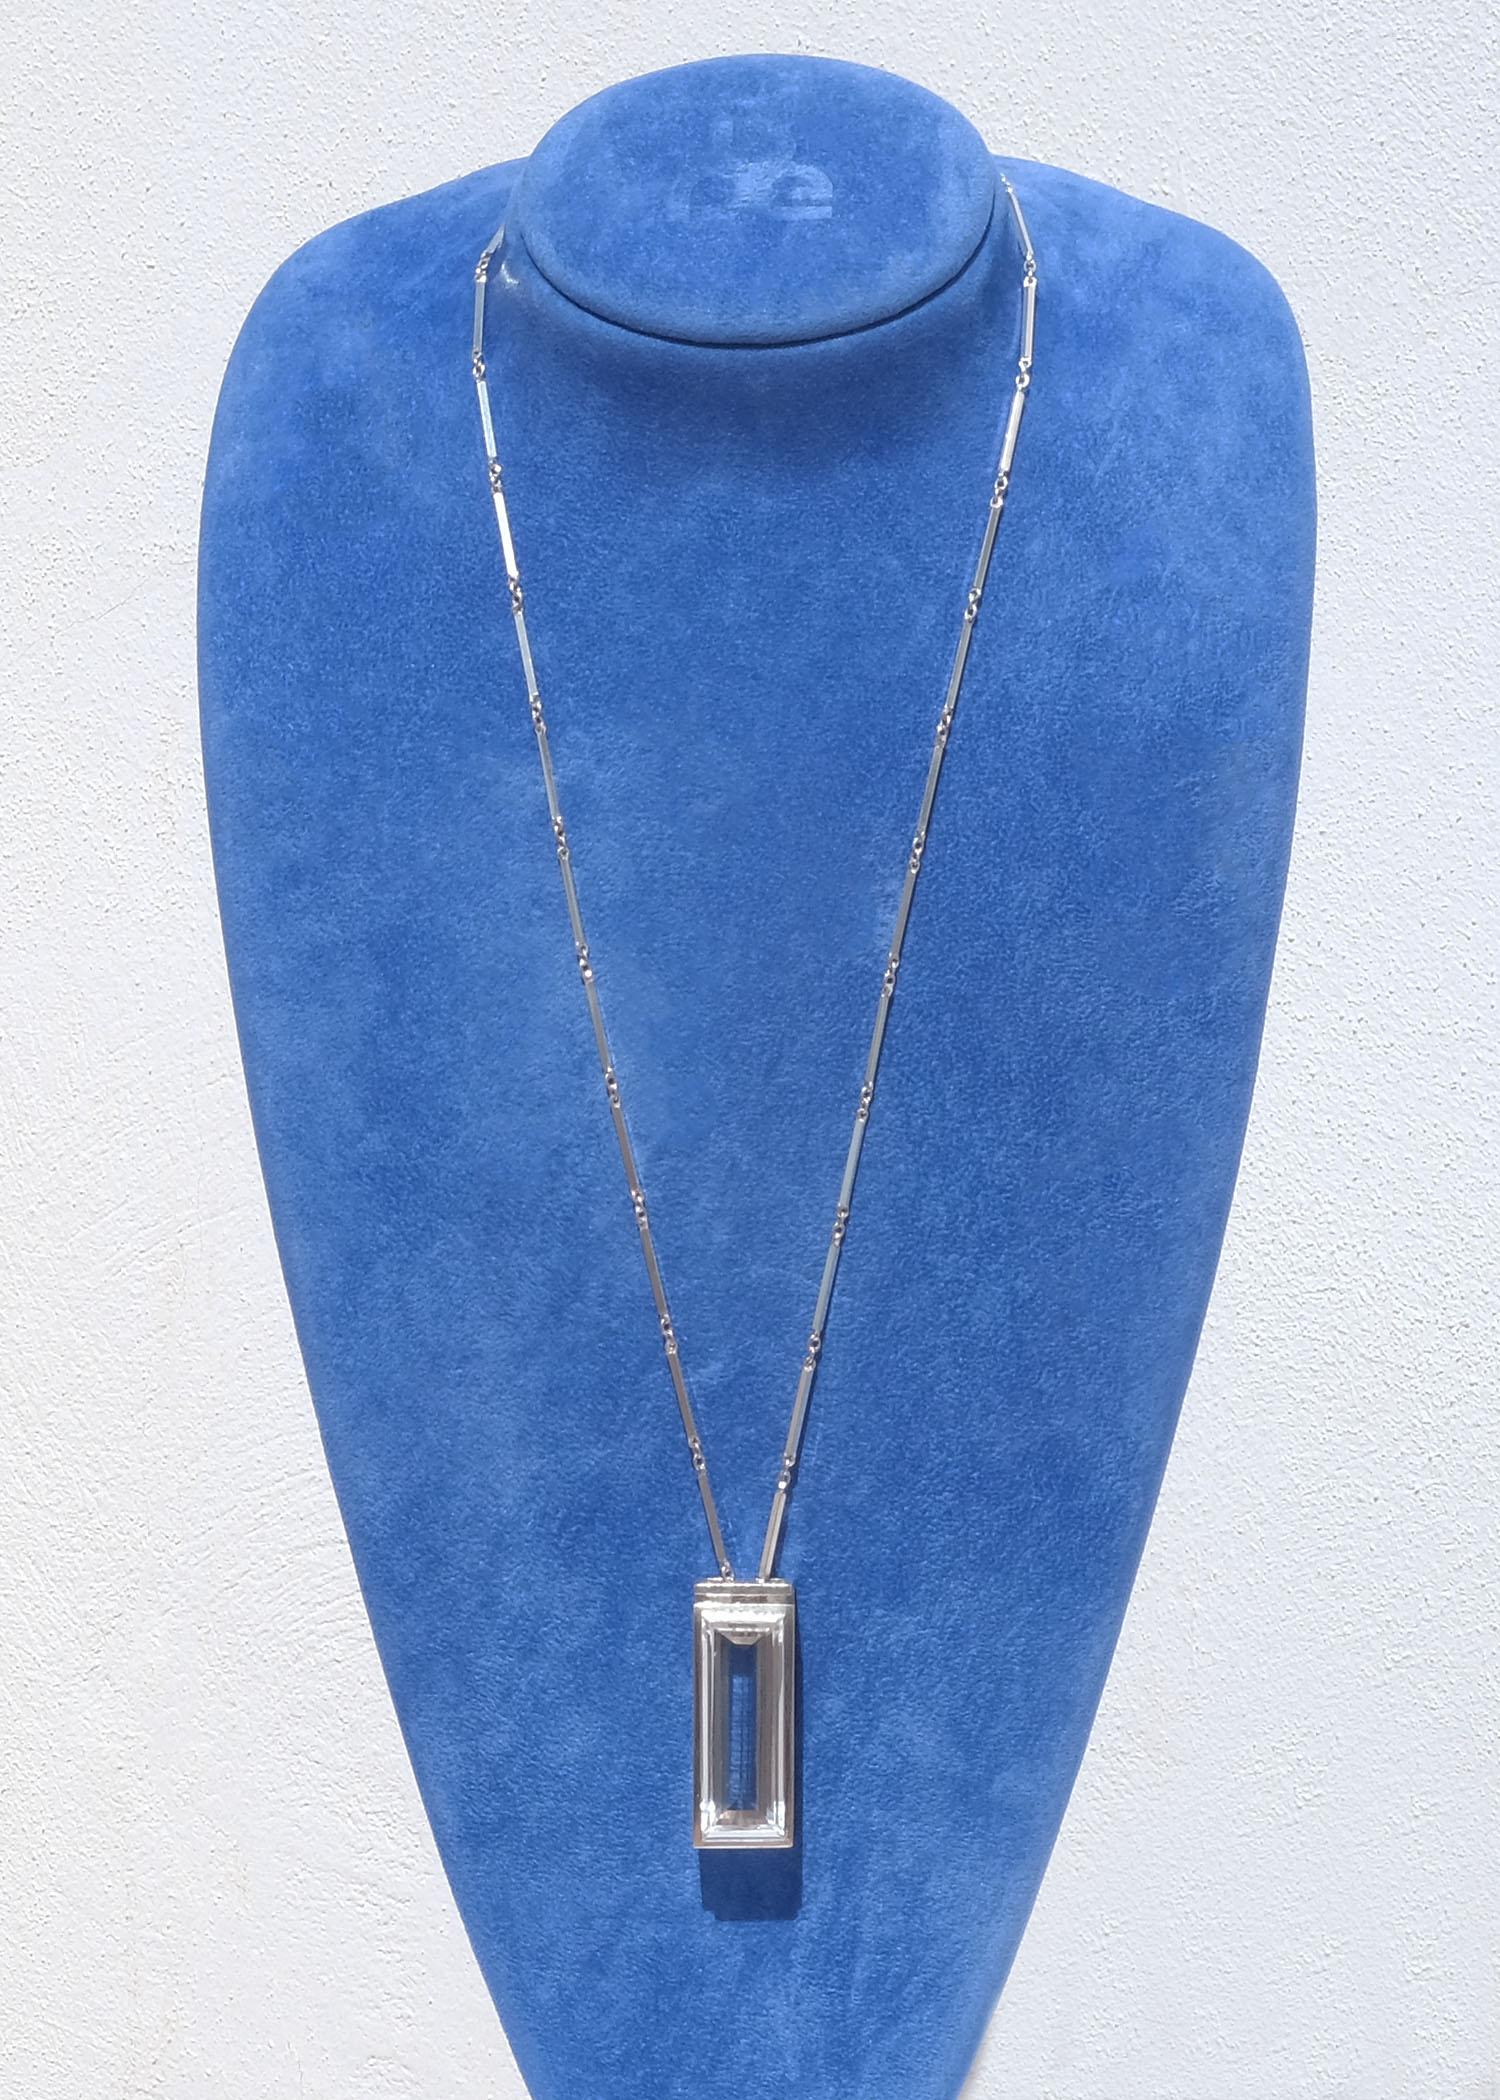 Silver Necklace with a Rock Crystal Pendant by Swedish Atelje Stigbert Year 1967 For Sale 5